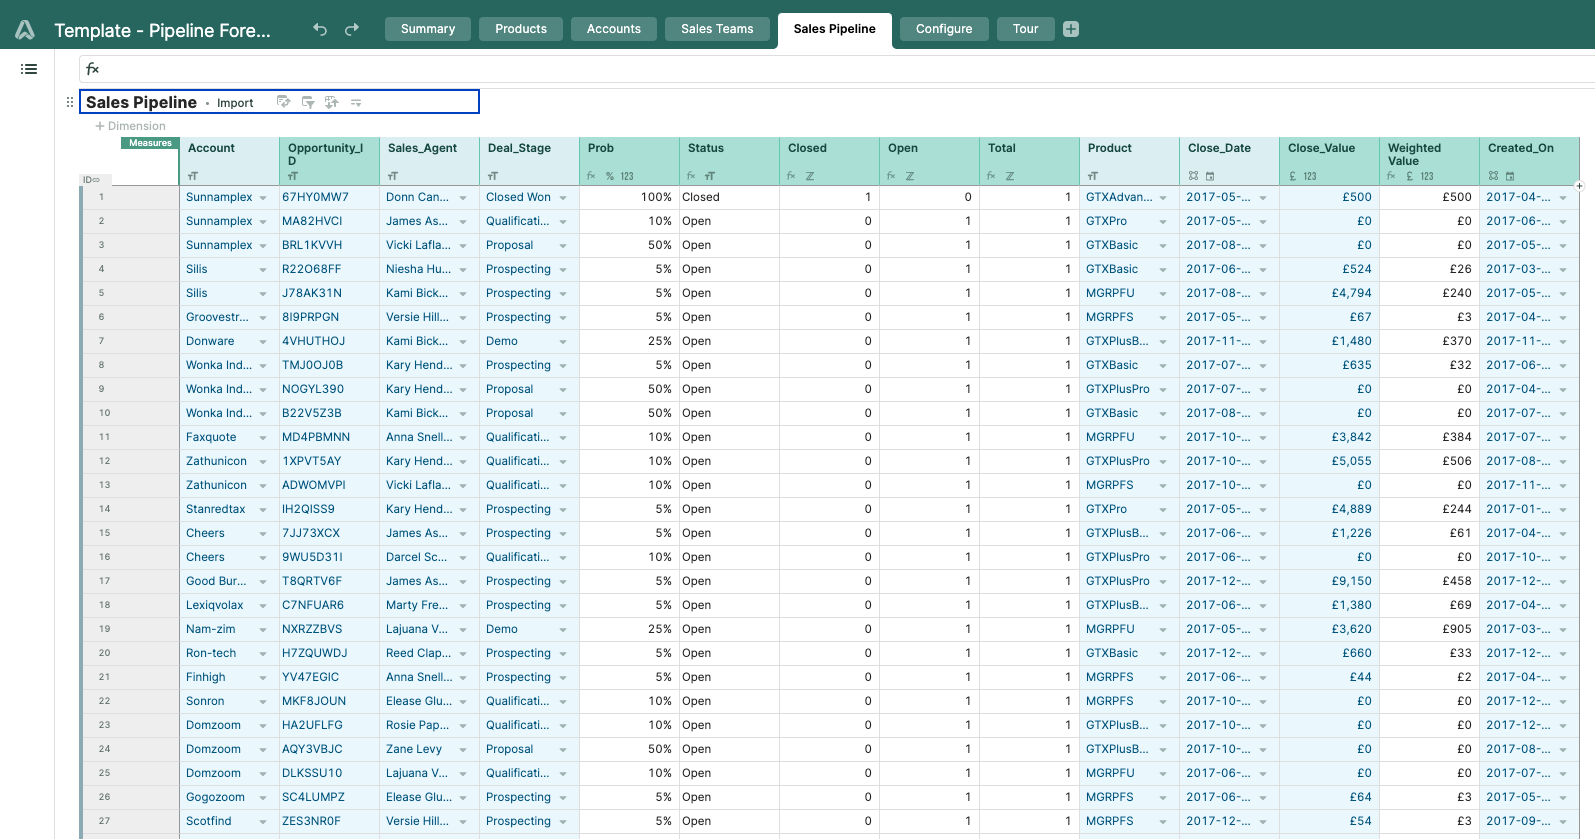 Sales Pipeline Forecast Template - easily import data from your CRM.